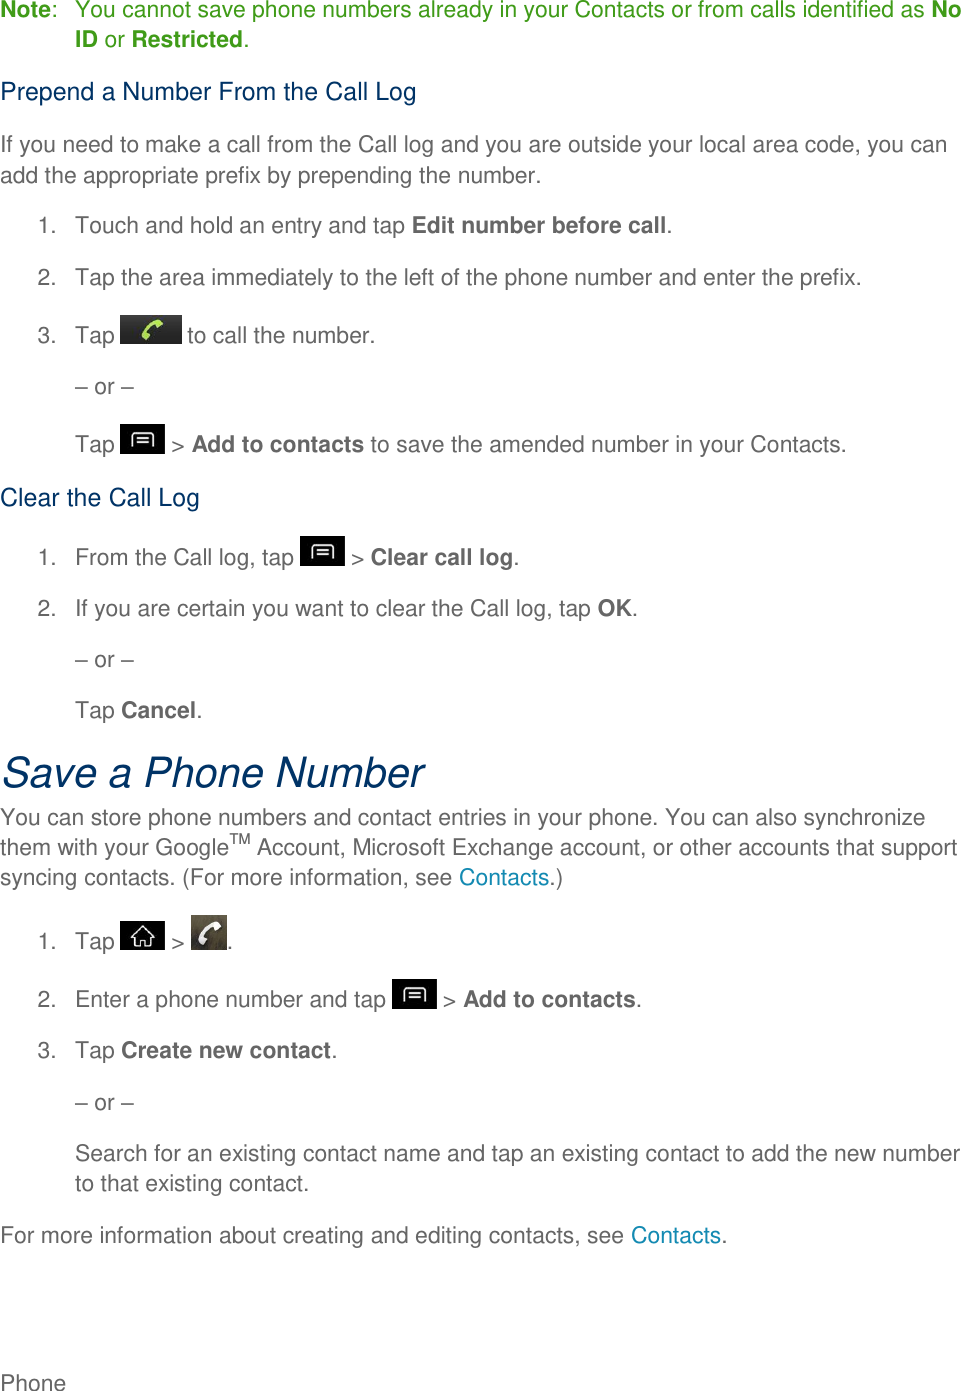 Phone     Note:   You cannot save phone numbers already in your Contacts or from calls identified as No ID or Restricted. Prepend a Number From the Call Log If you need to make a call from the Call log and you are outside your local area code, you can add the appropriate prefix by prepending the number. 1.  Touch and hold an entry and tap Edit number before call. 2.  Tap the area immediately to the left of the phone number and enter the prefix. 3.  Tap   to call the number.  or  Tap   &gt; Add to contacts to save the amended number in your Contacts. Clear the Call Log 1.  From the Call log, tap   &gt; Clear call log. 2.  If you are certain you want to clear the Call log, tap OK.  or  Tap Cancel. Save a Phone Number You can store phone numbers and contact entries in your phone. You can also synchronize them with your GoogleTM Account, Microsoft Exchange account, or other accounts that support syncing contacts. (For more information, see Contacts.) 1.  Tap   &gt;  . 2.  Enter a phone number and tap   &gt; Add to contacts. 3.  Tap Create new contact.  or  Search for an existing contact name and tap an existing contact to add the new number to that existing contact. For more information about creating and editing contacts, see Contacts. 